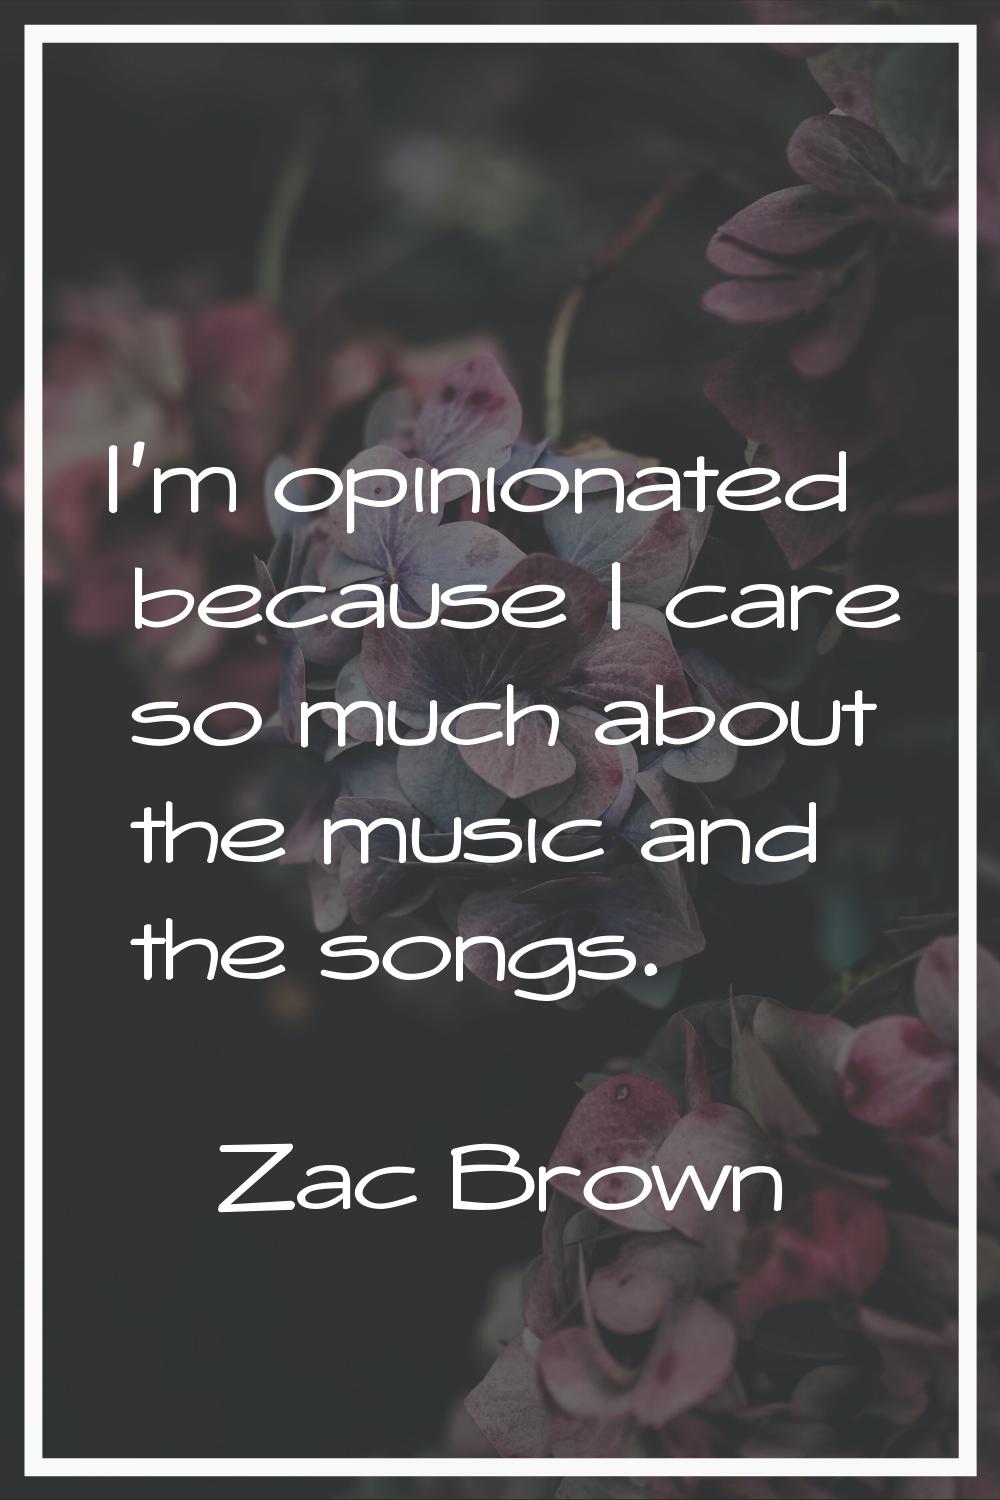 I'm opinionated because I care so much about the music and the songs.